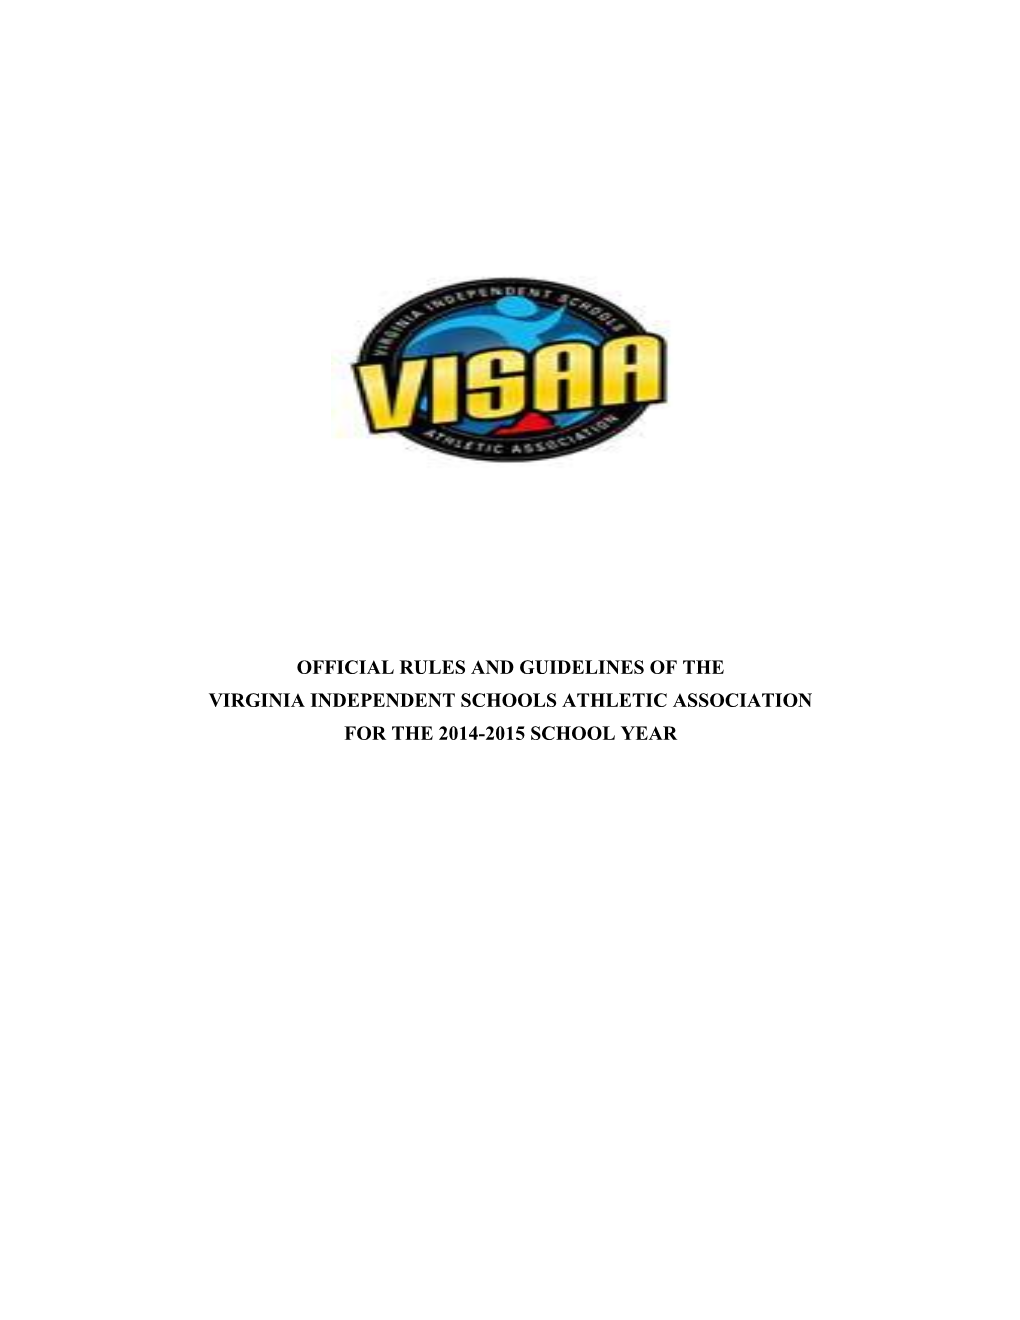 Official Policy of the Virginia Independent Athletic Association